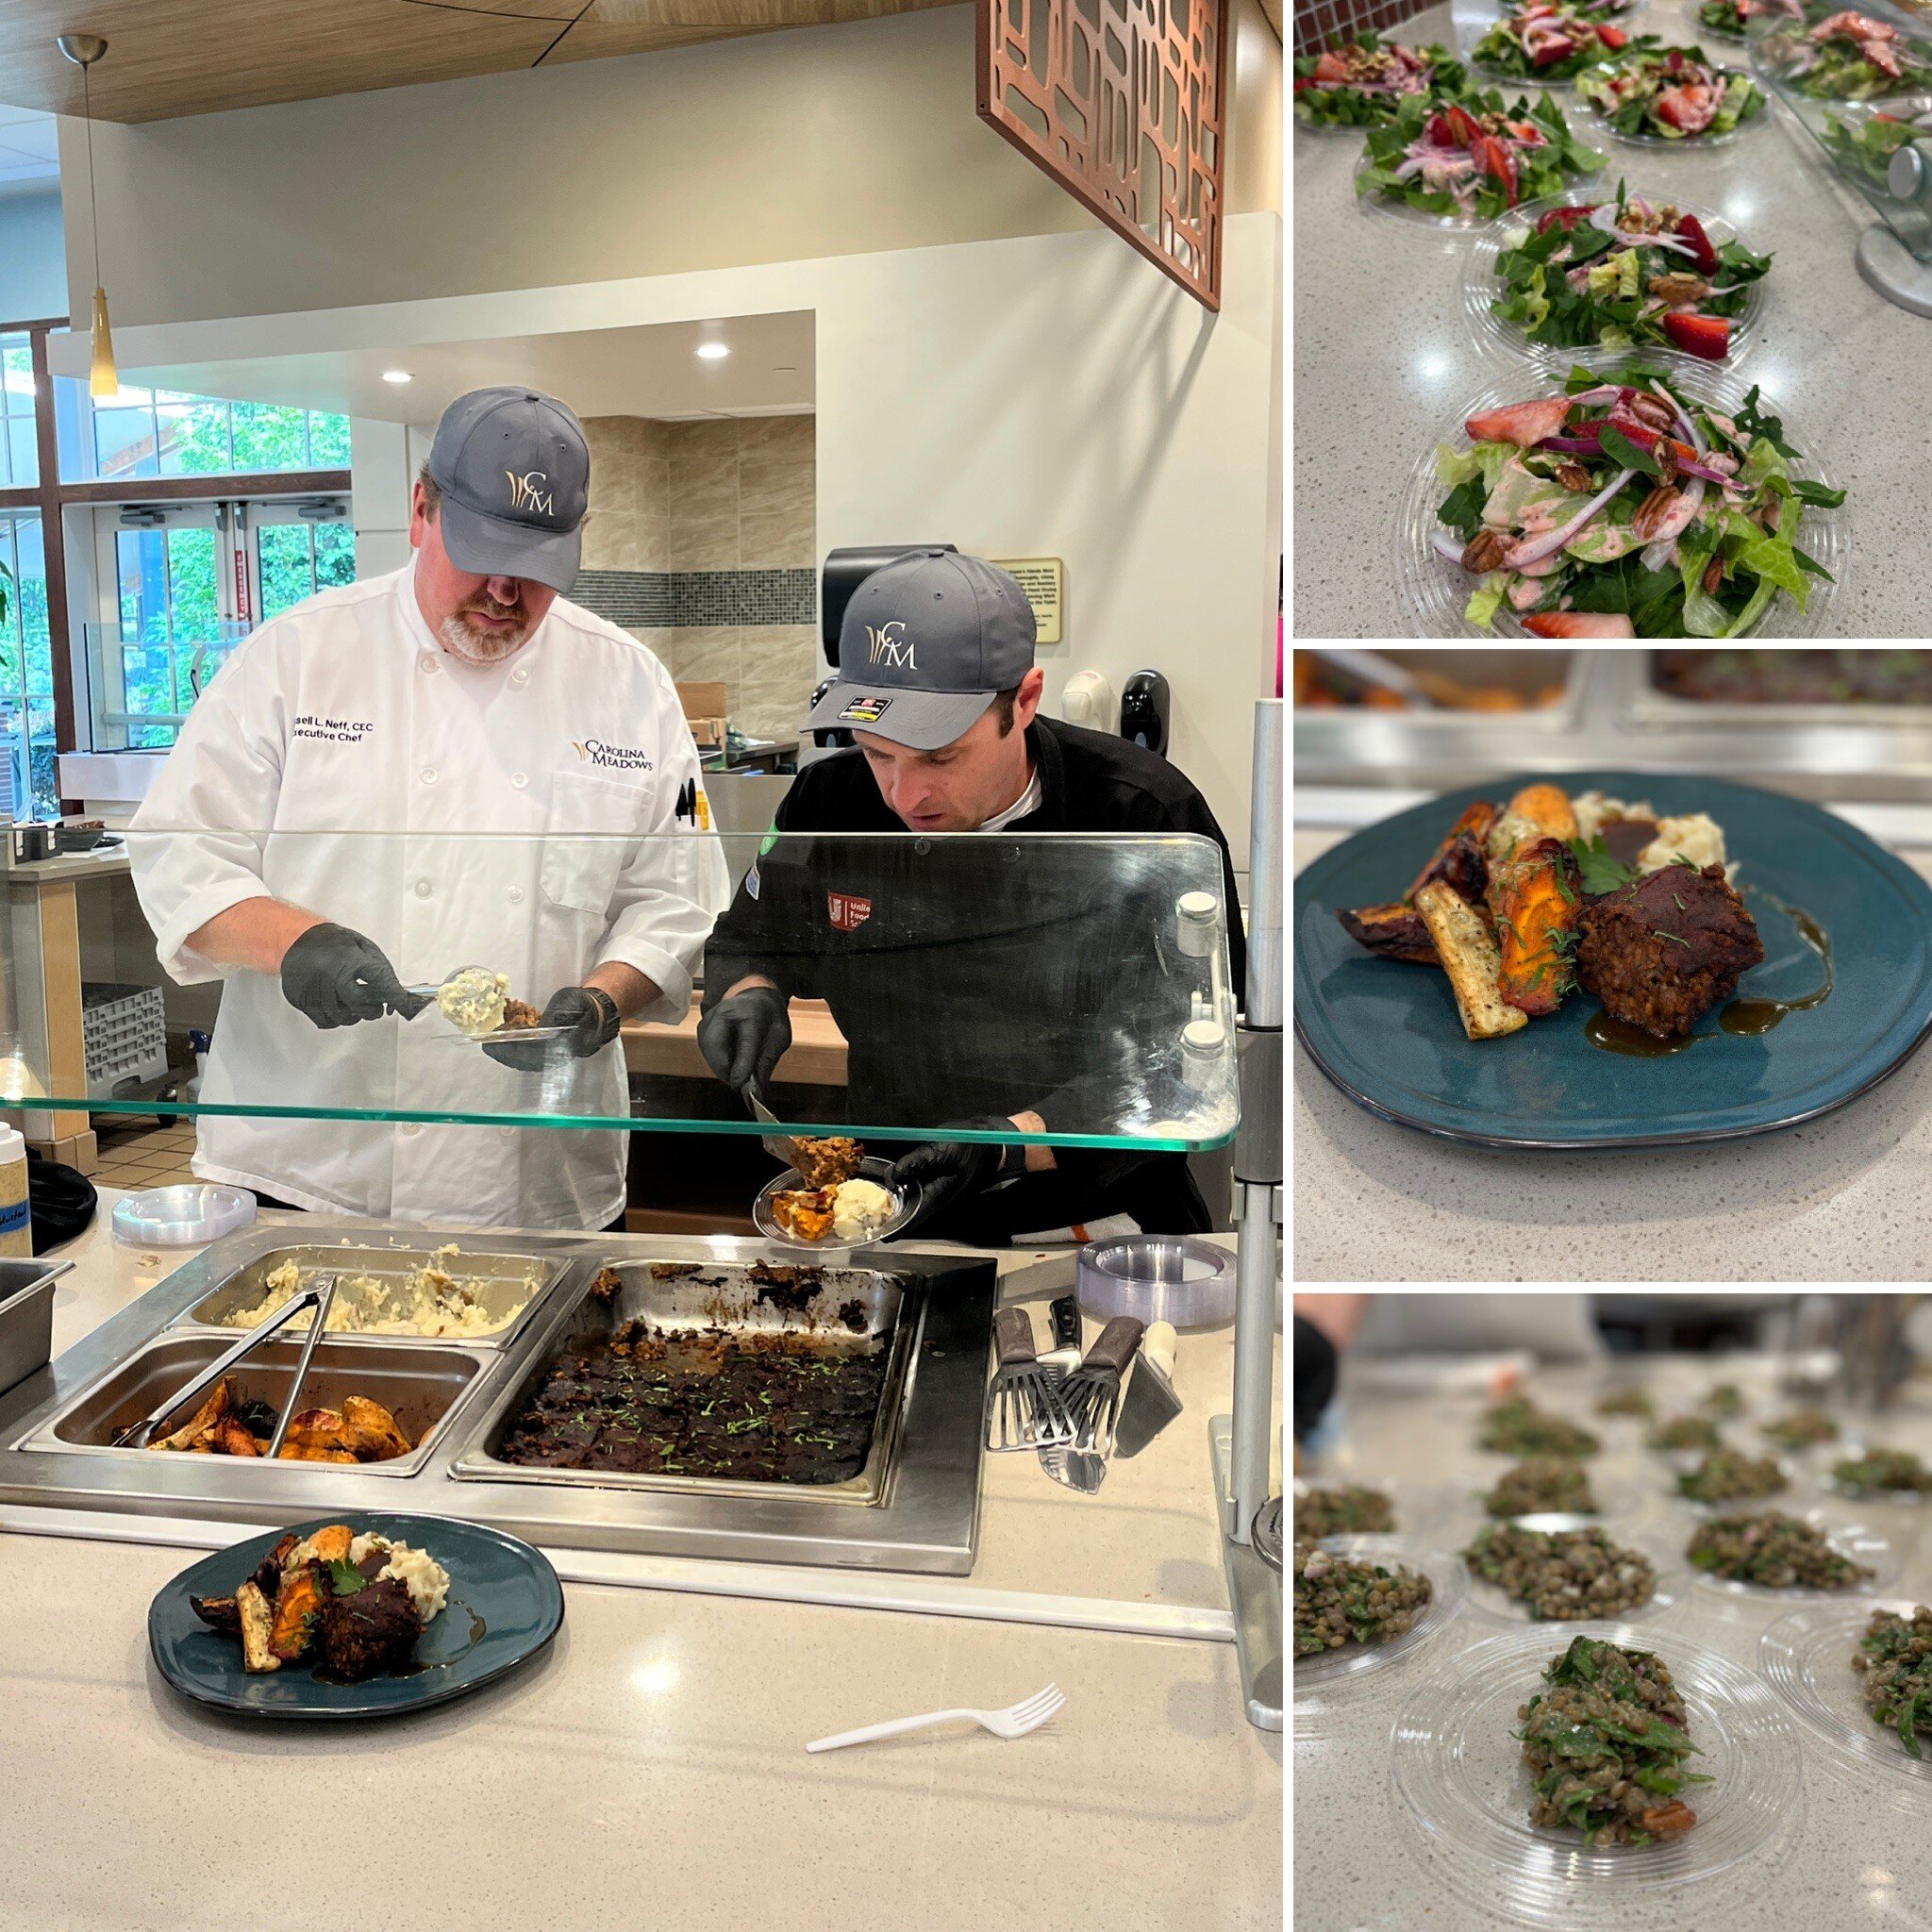 Today the Marketplace hosted guest Chef JC Lopategui, who took over the Chef's Table serving samples of various vegetarian dishes. Residents and employees enjoyed sampling plant-forward menu items, including Lentil and Sweet Potato &quot;Meat&quot; L